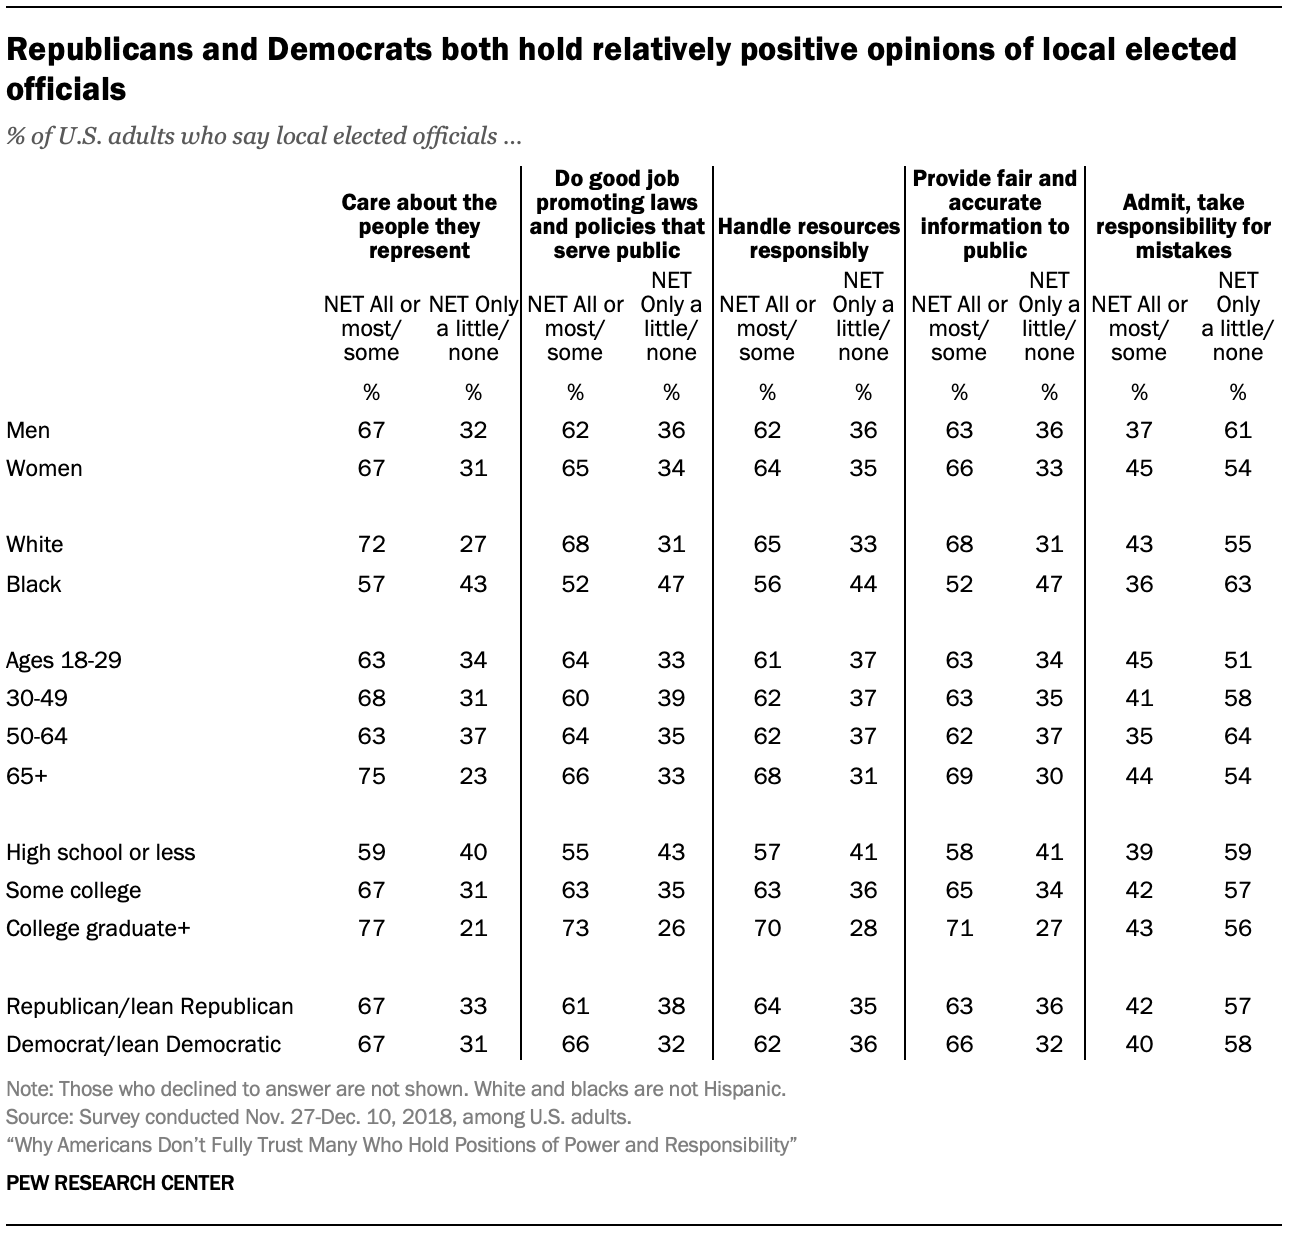 Republicans and Democrats both hold relatively positive opinions of local elected officials